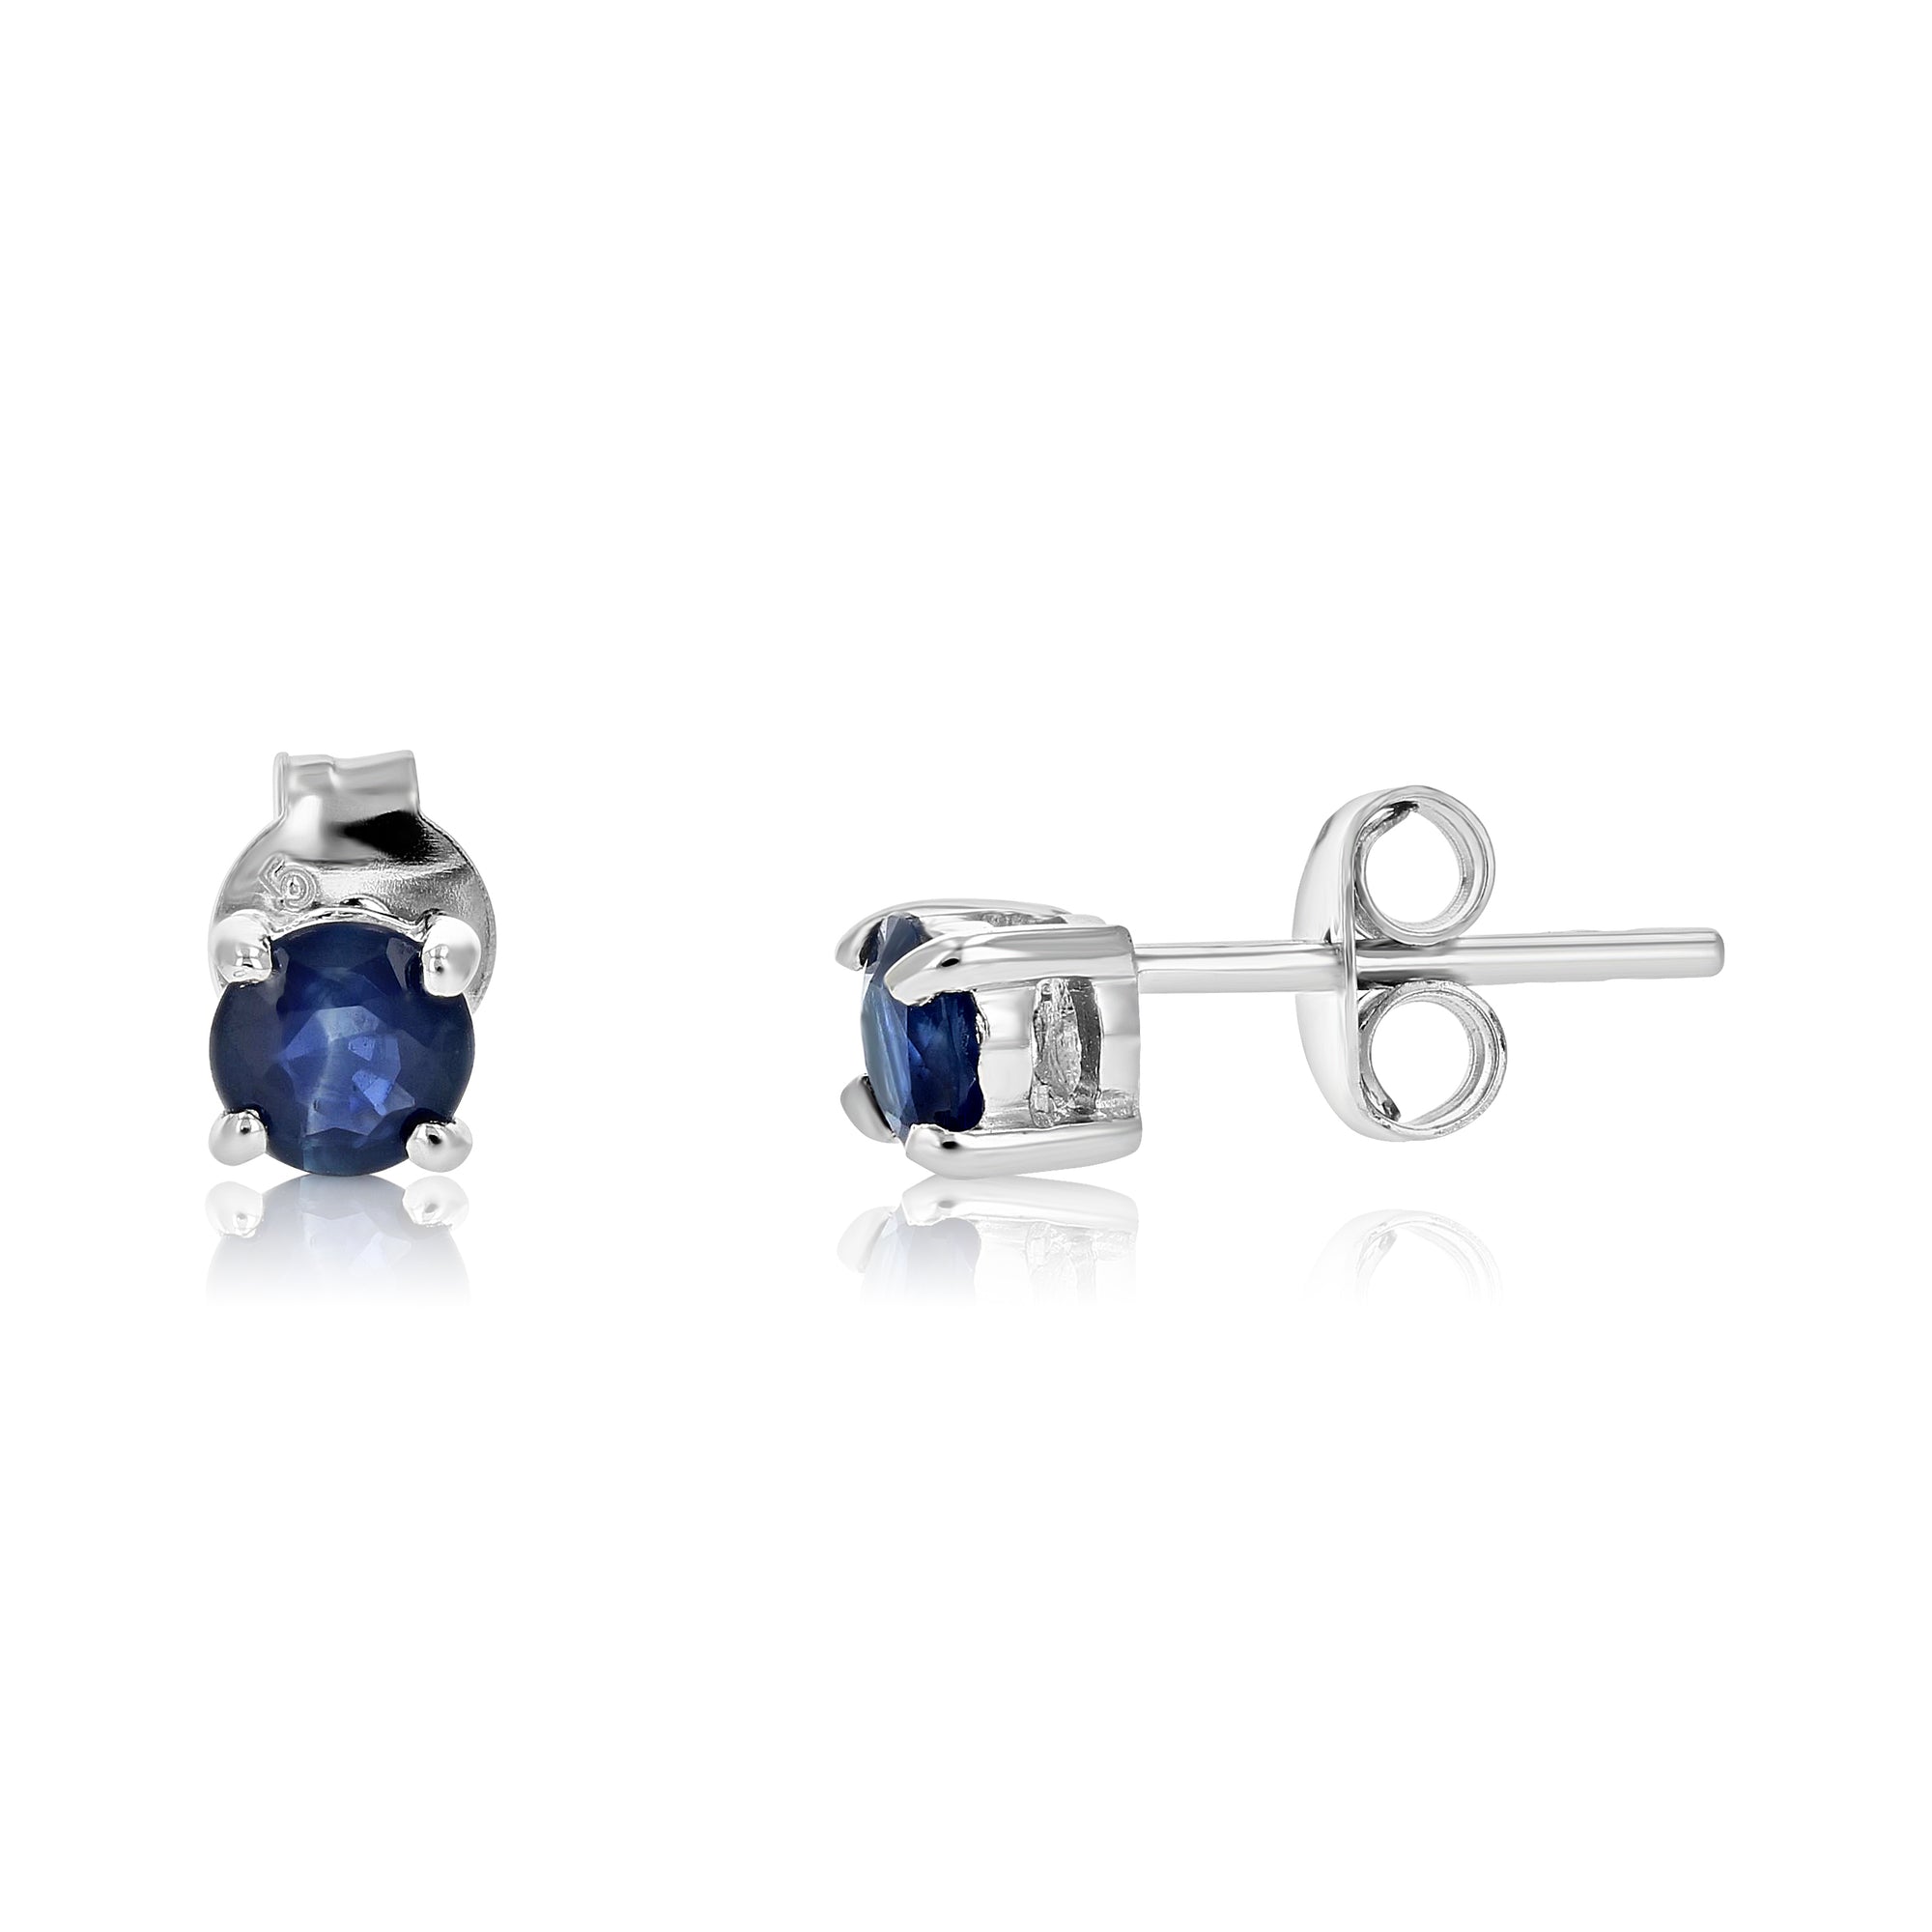 1 cttw Round Blue Sapphire Stud Earrings in .925 Sterling Silver with Rhodium